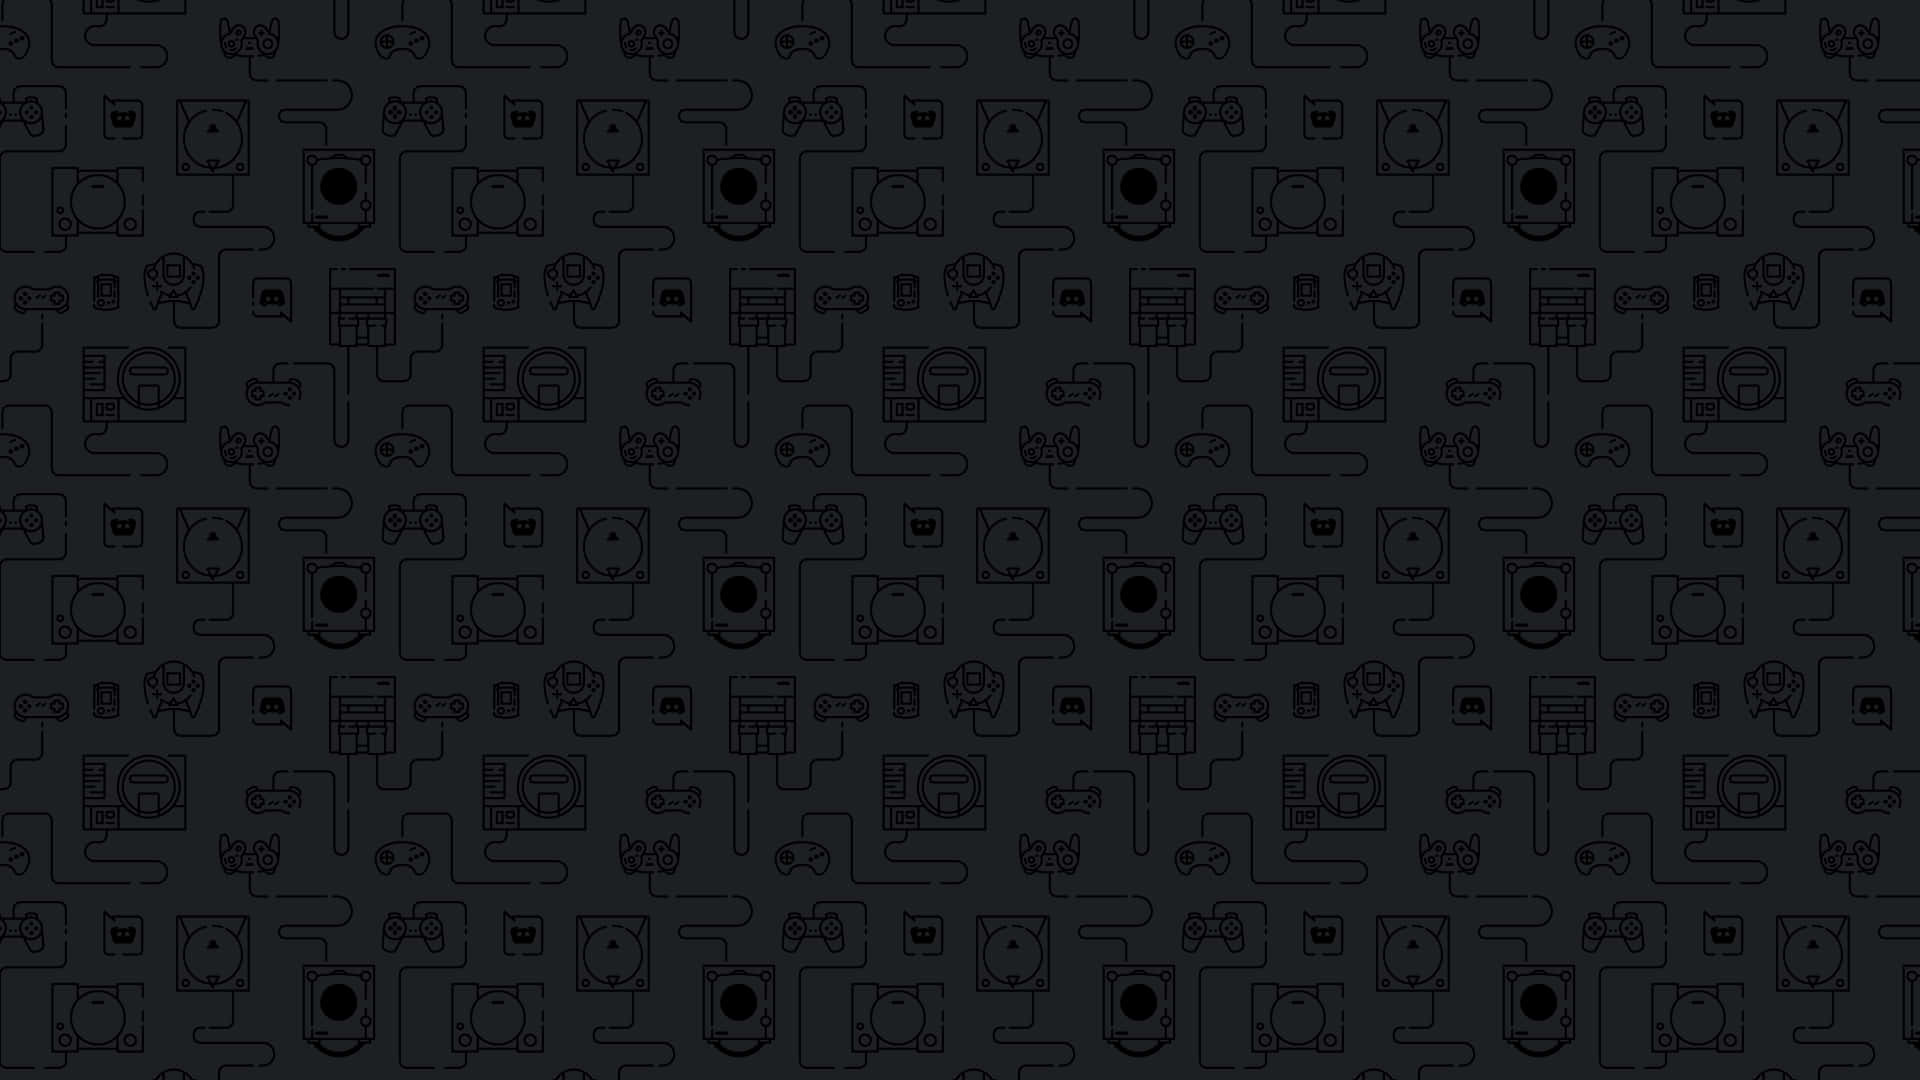 Keeping People Connected Through Cool Discord Wallpaper